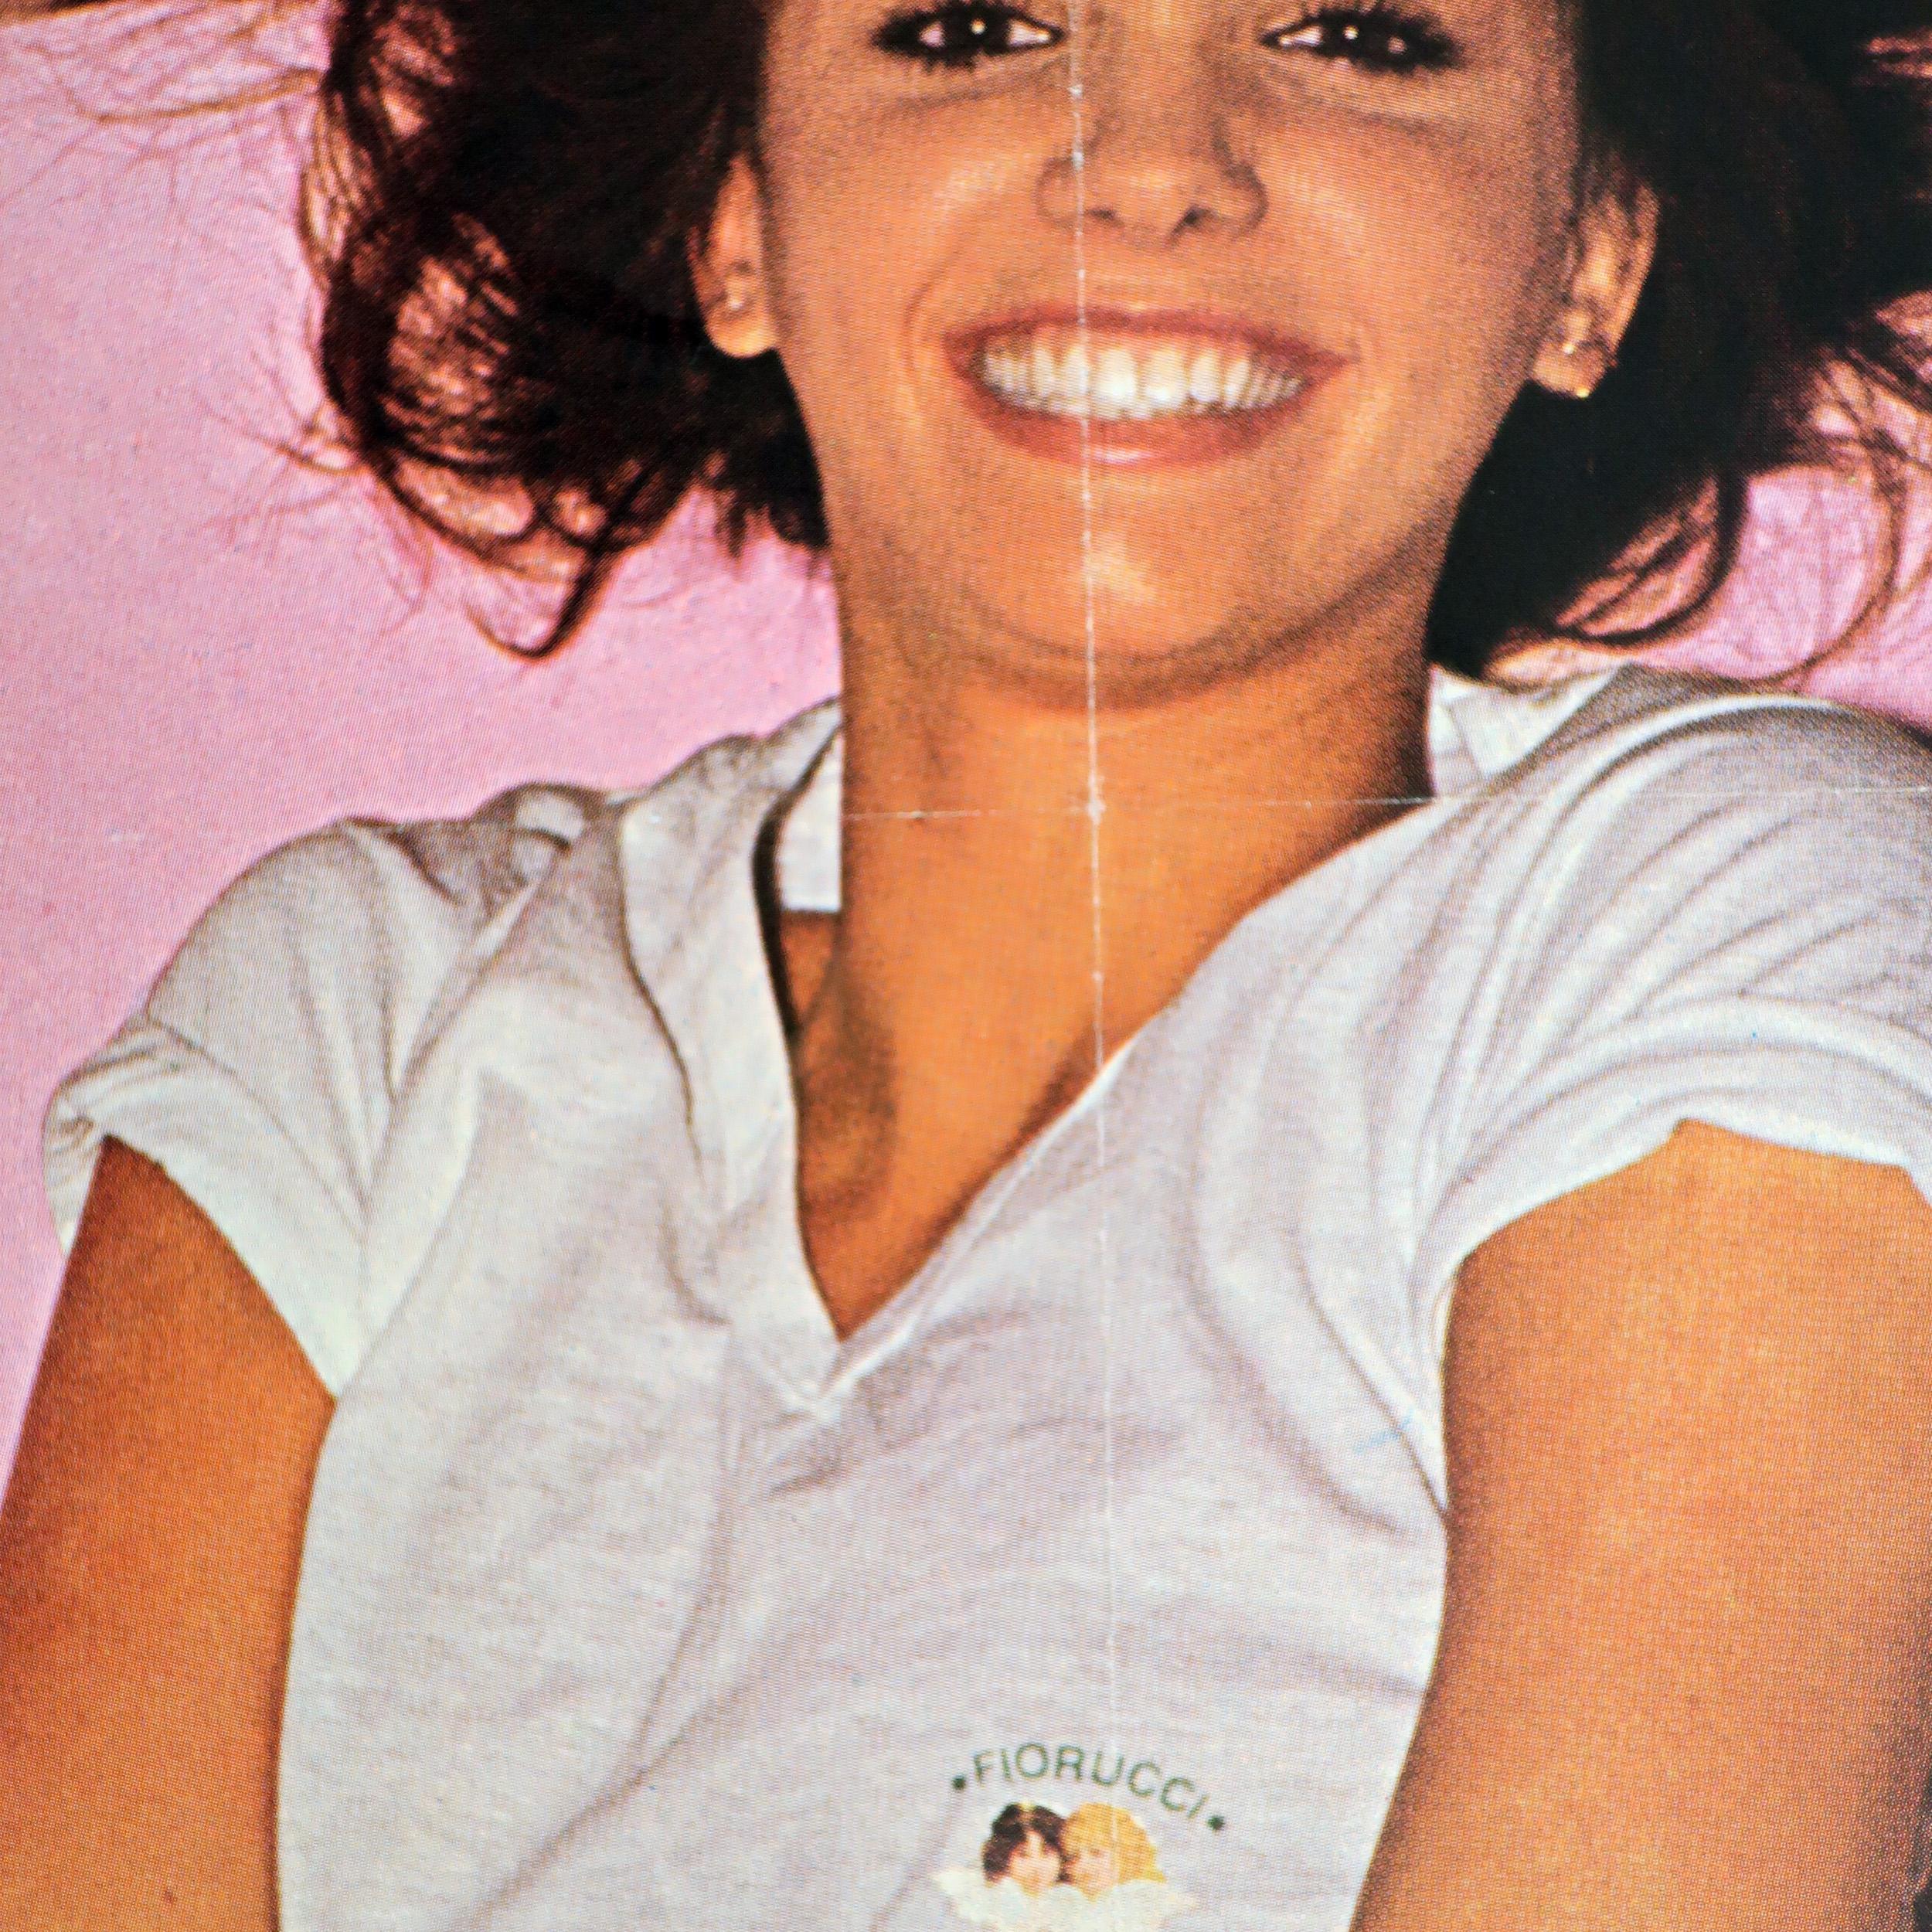 A vintage and rare Fiorucci poster featuring a beautiful pants-less woman caught in mid-disrobing of a white v-neck t-shirt with the iconic Fiorucci two angels logo. Model poses in front of a pink background and Fiorucci branding (“Fiorucci Sweet